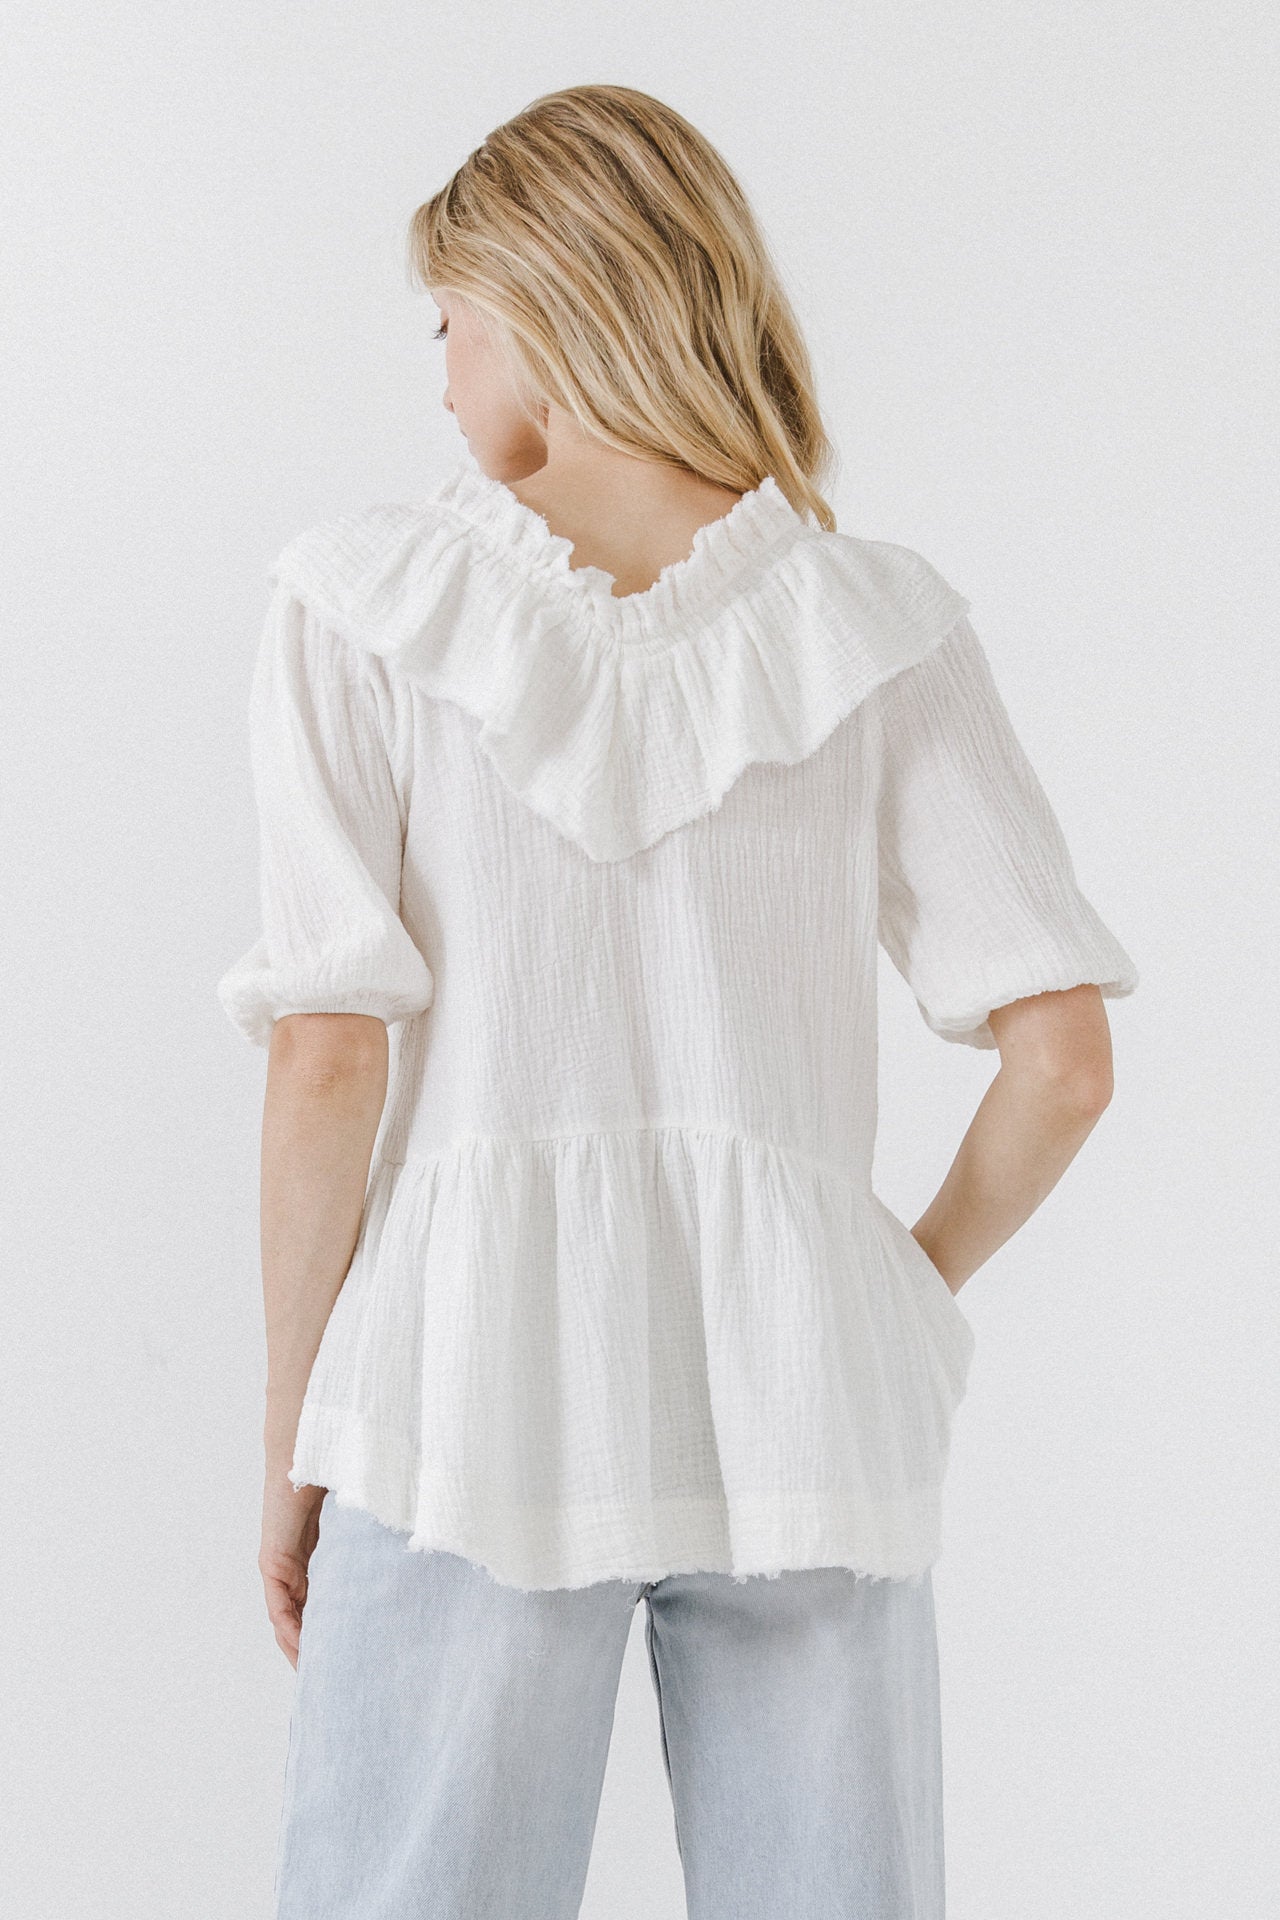 FREE THE ROSES - Ruffle Neckline Blouse - BLOUSES available at Objectrare